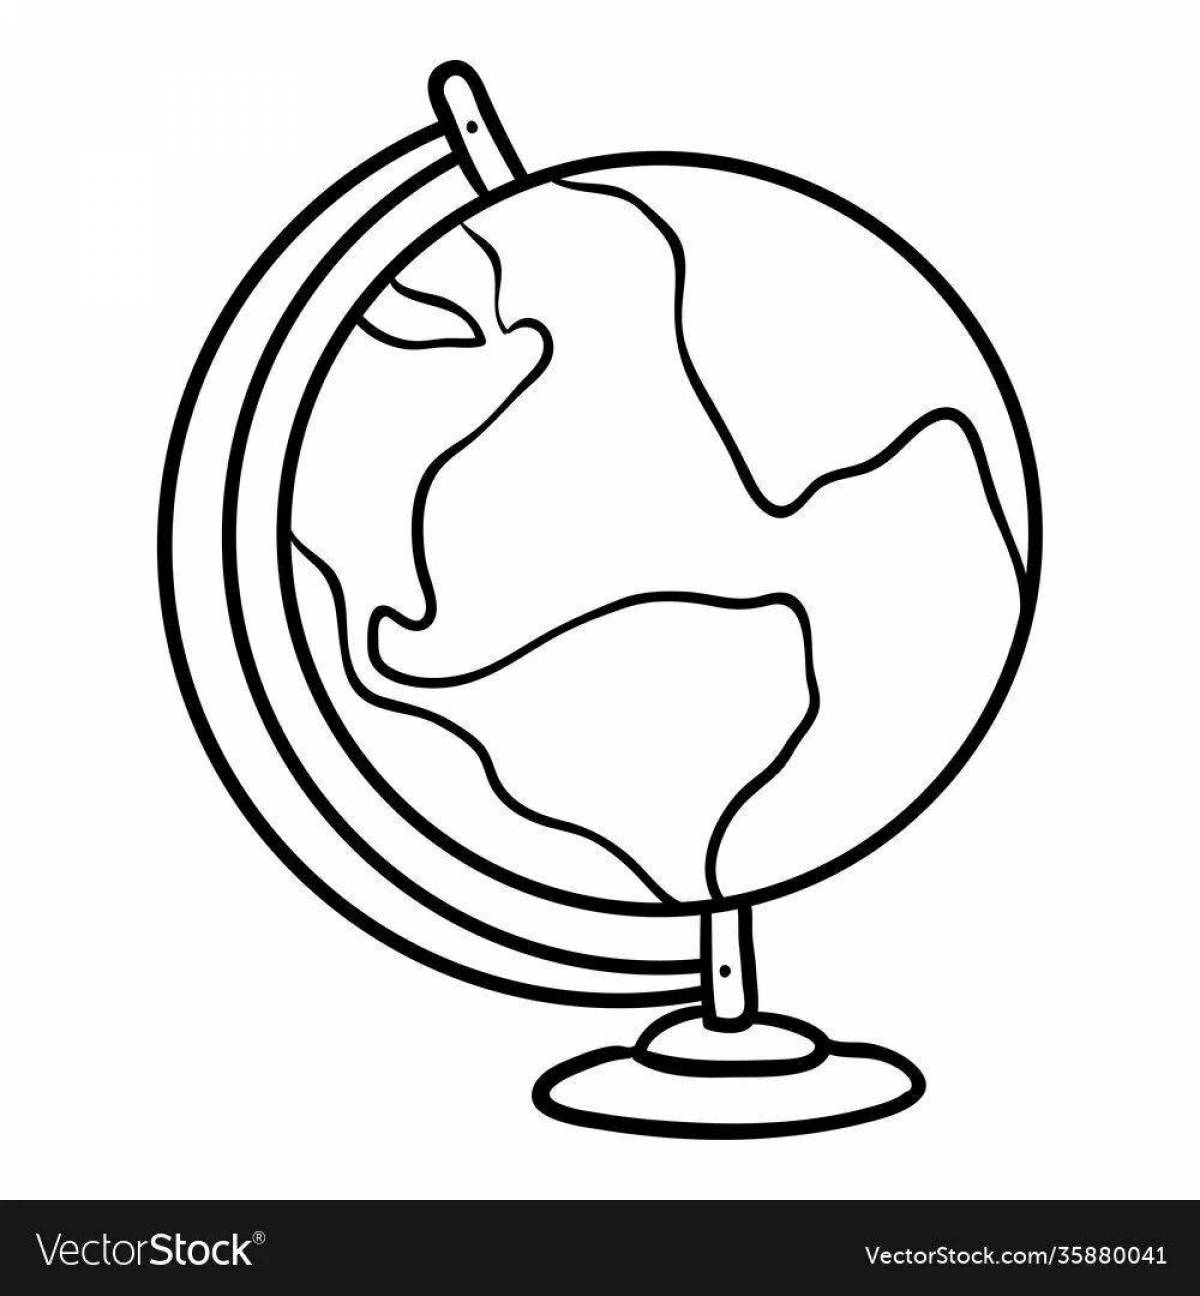 A fun world coloring template for kids